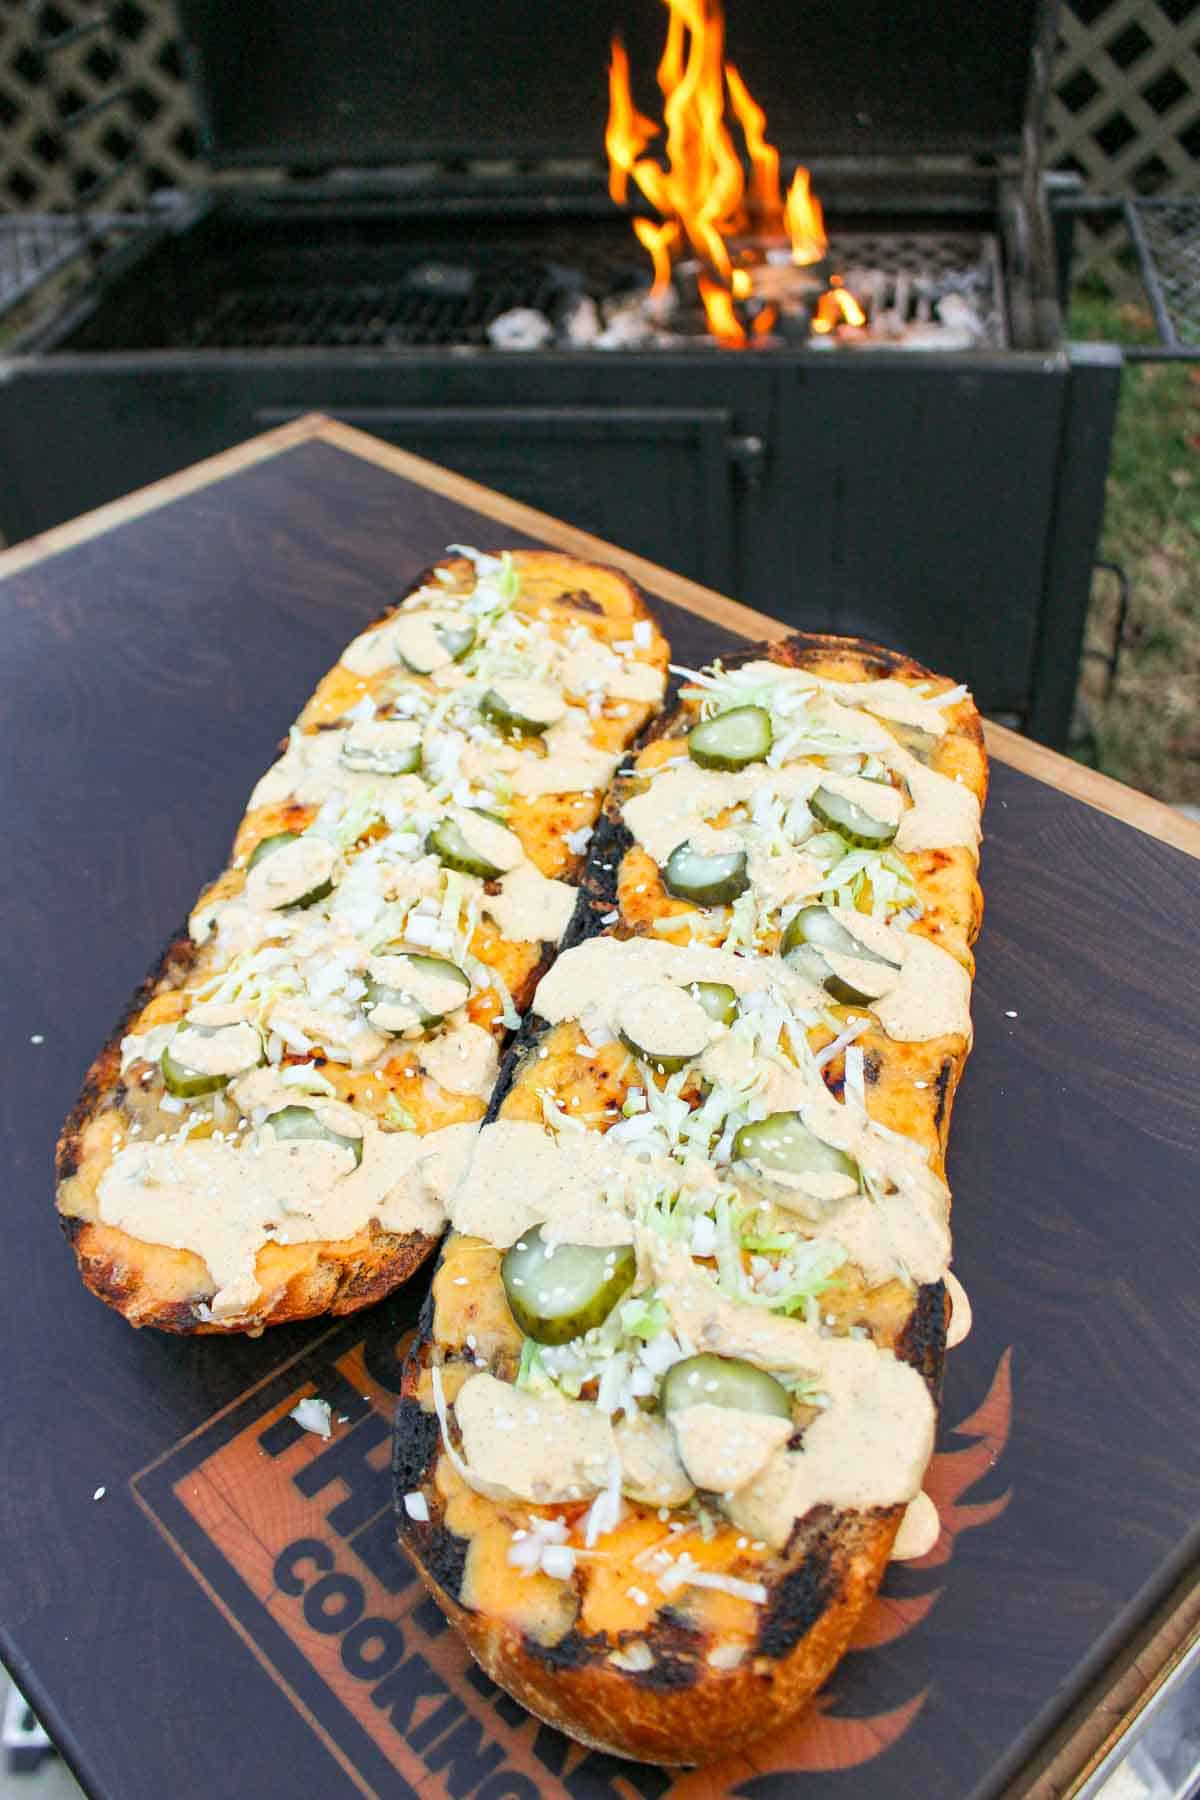 Big Mac Stuffed Bread is the ultimate comfort food that comes together quickly on the grill. 